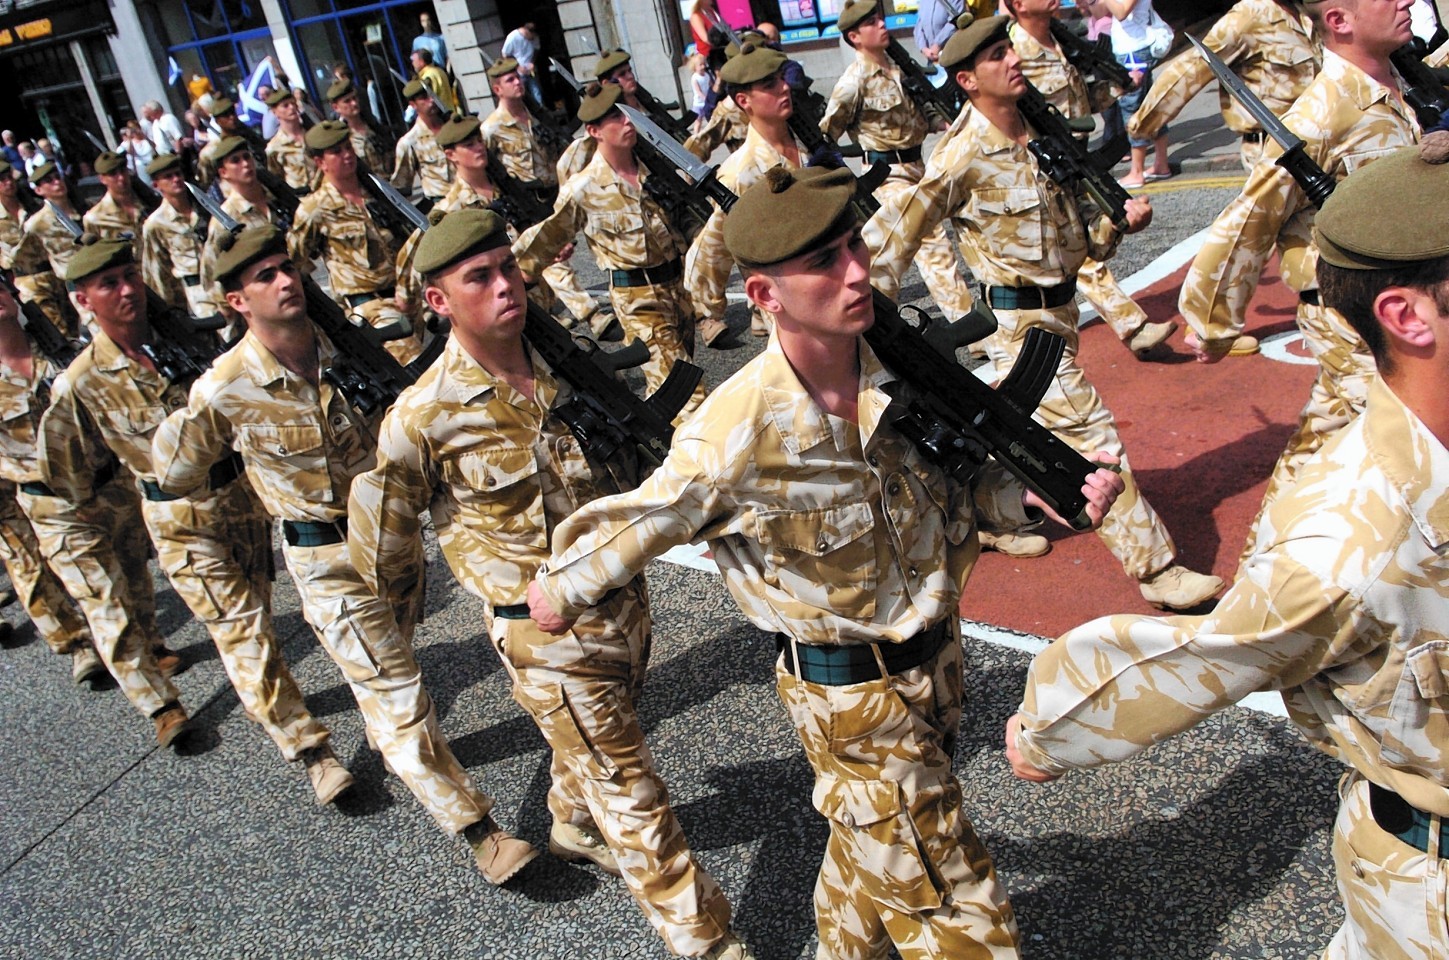 The Royal Regiment of Scotland are to visit Inverness